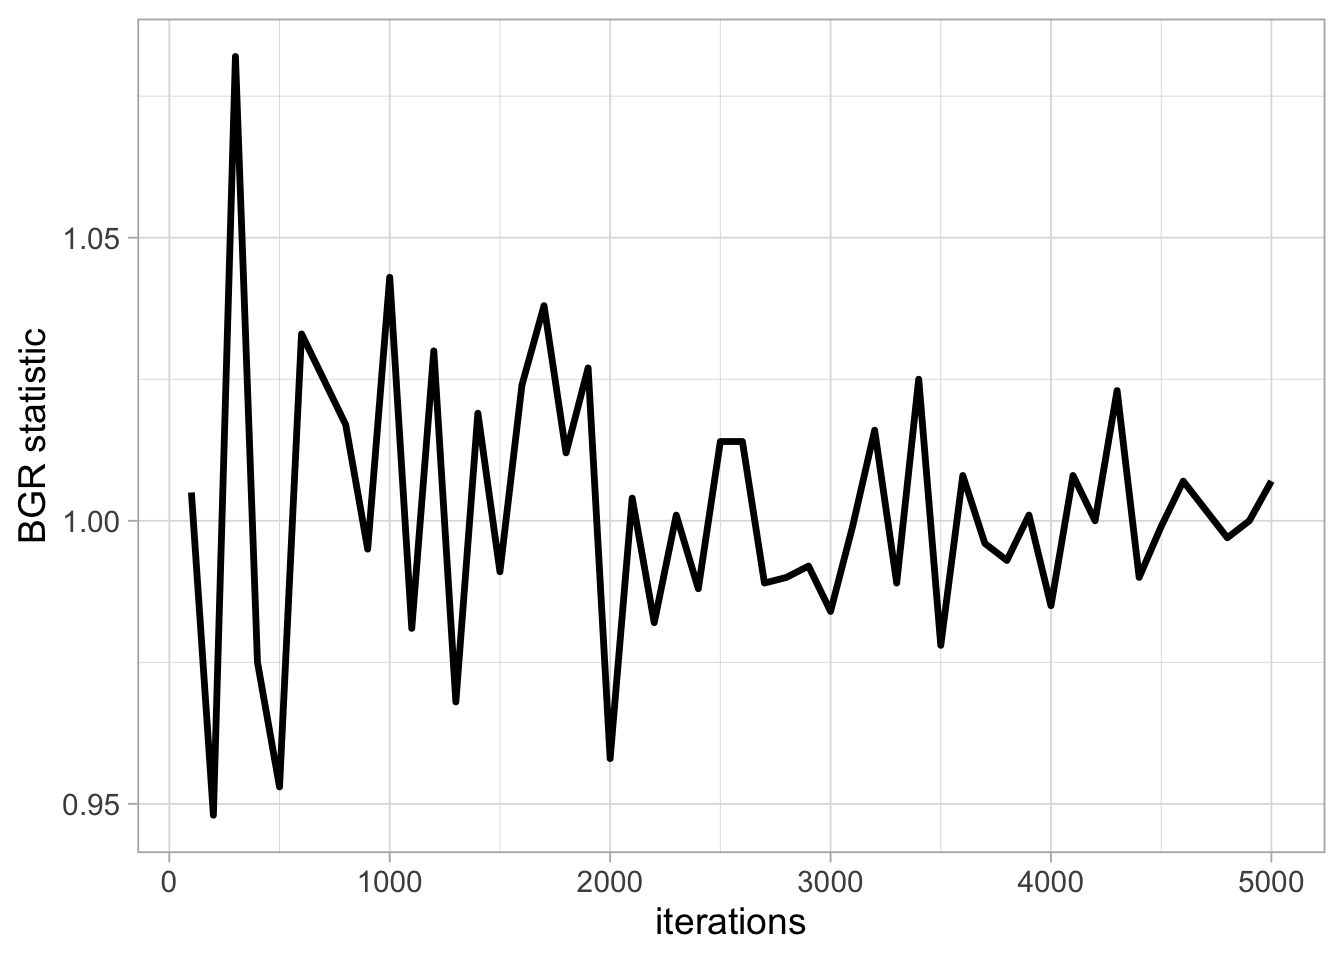 Brooks-Gelman-Rubin statistic as a function of the number of iterations.